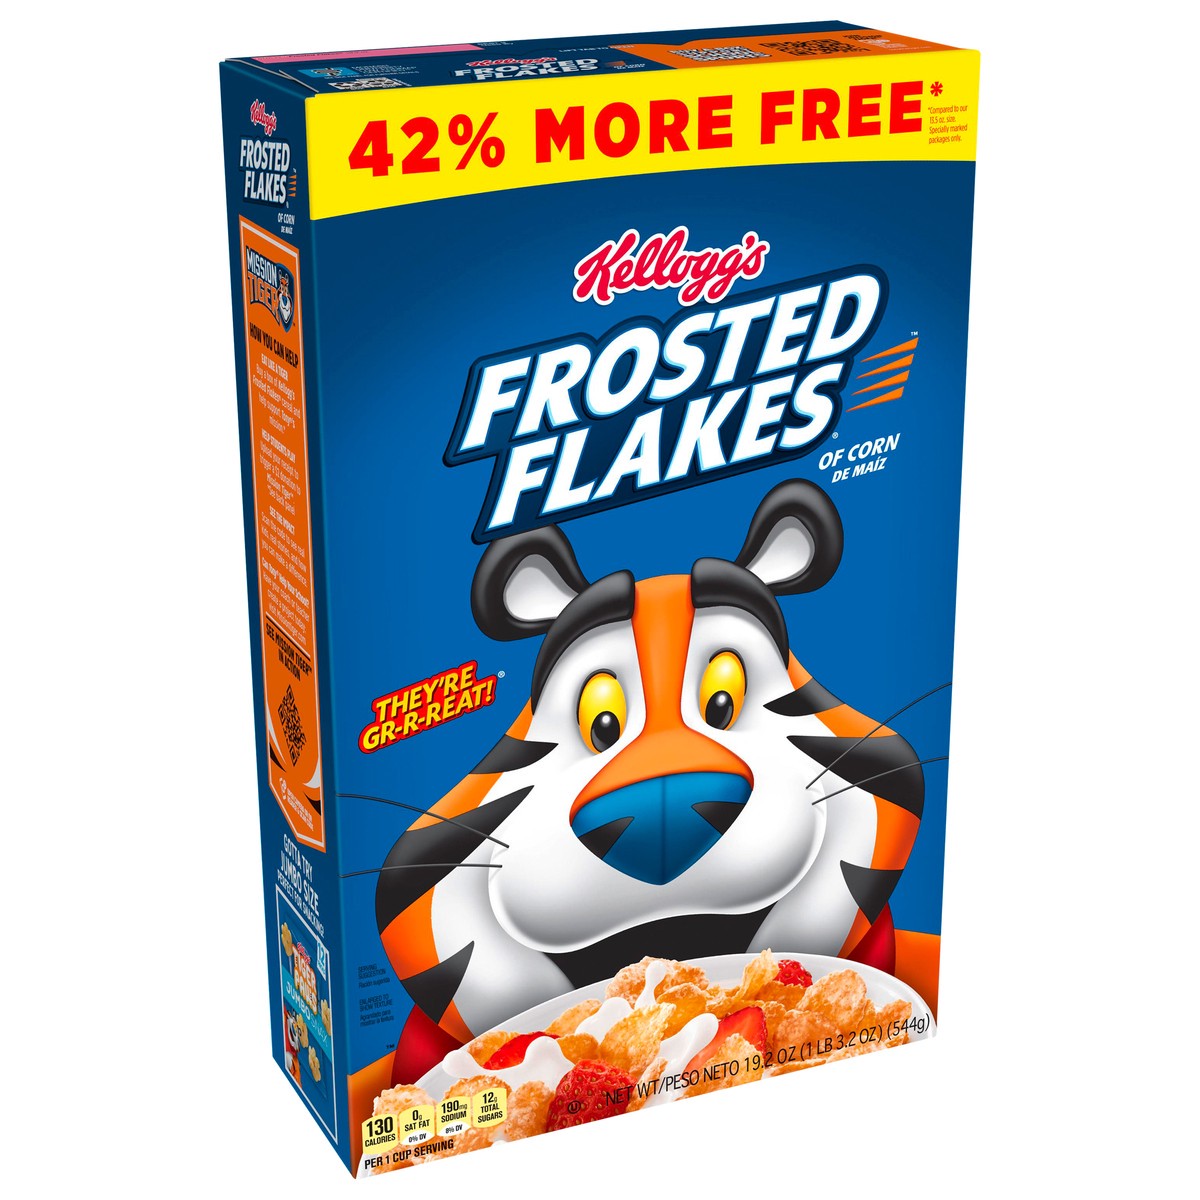 slide 7 of 8, Frosted Flakes Kellogg's Frosted Flakes Breakfast Cereal, 8 Vitamins and Minerals, Kids Snacks, Original, 19.2oz Box, 1 Box, 19.2 oz